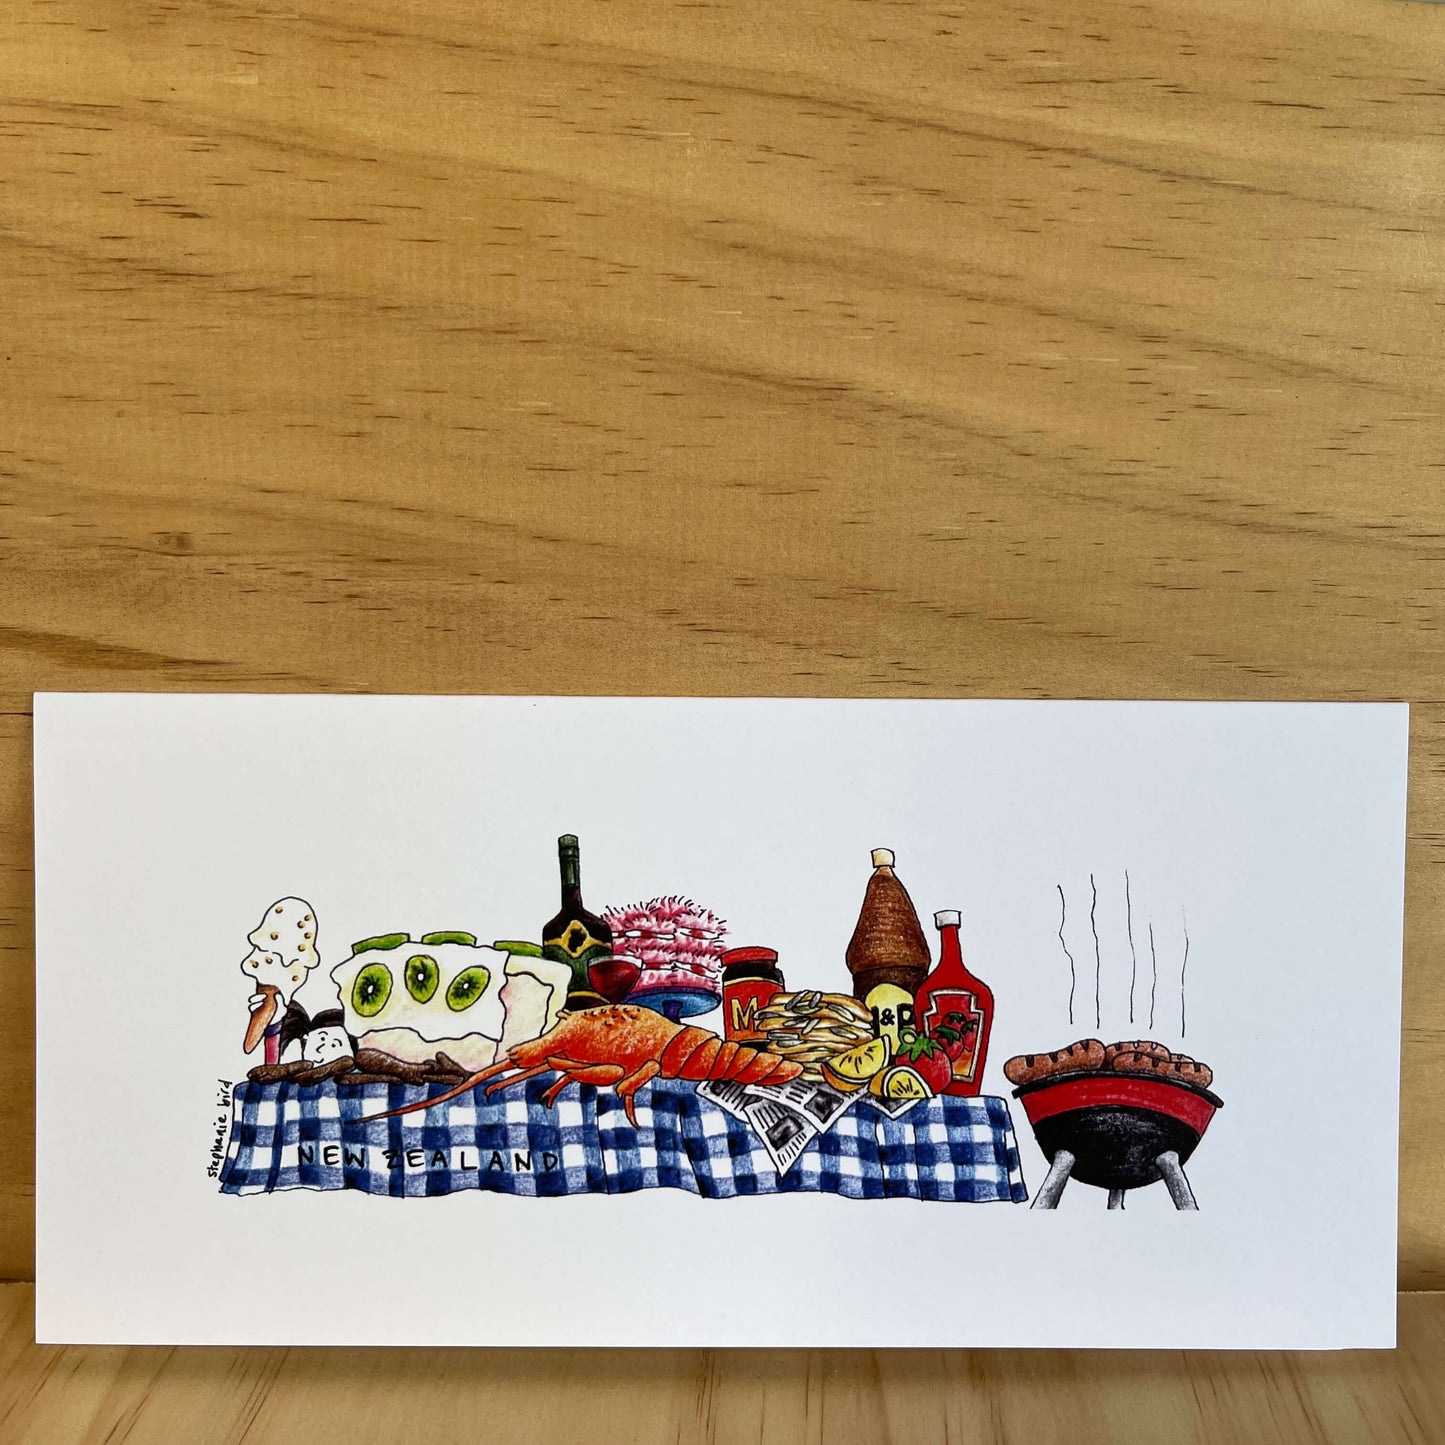 Greeting card with a classic Kiwi BBQ table and food.